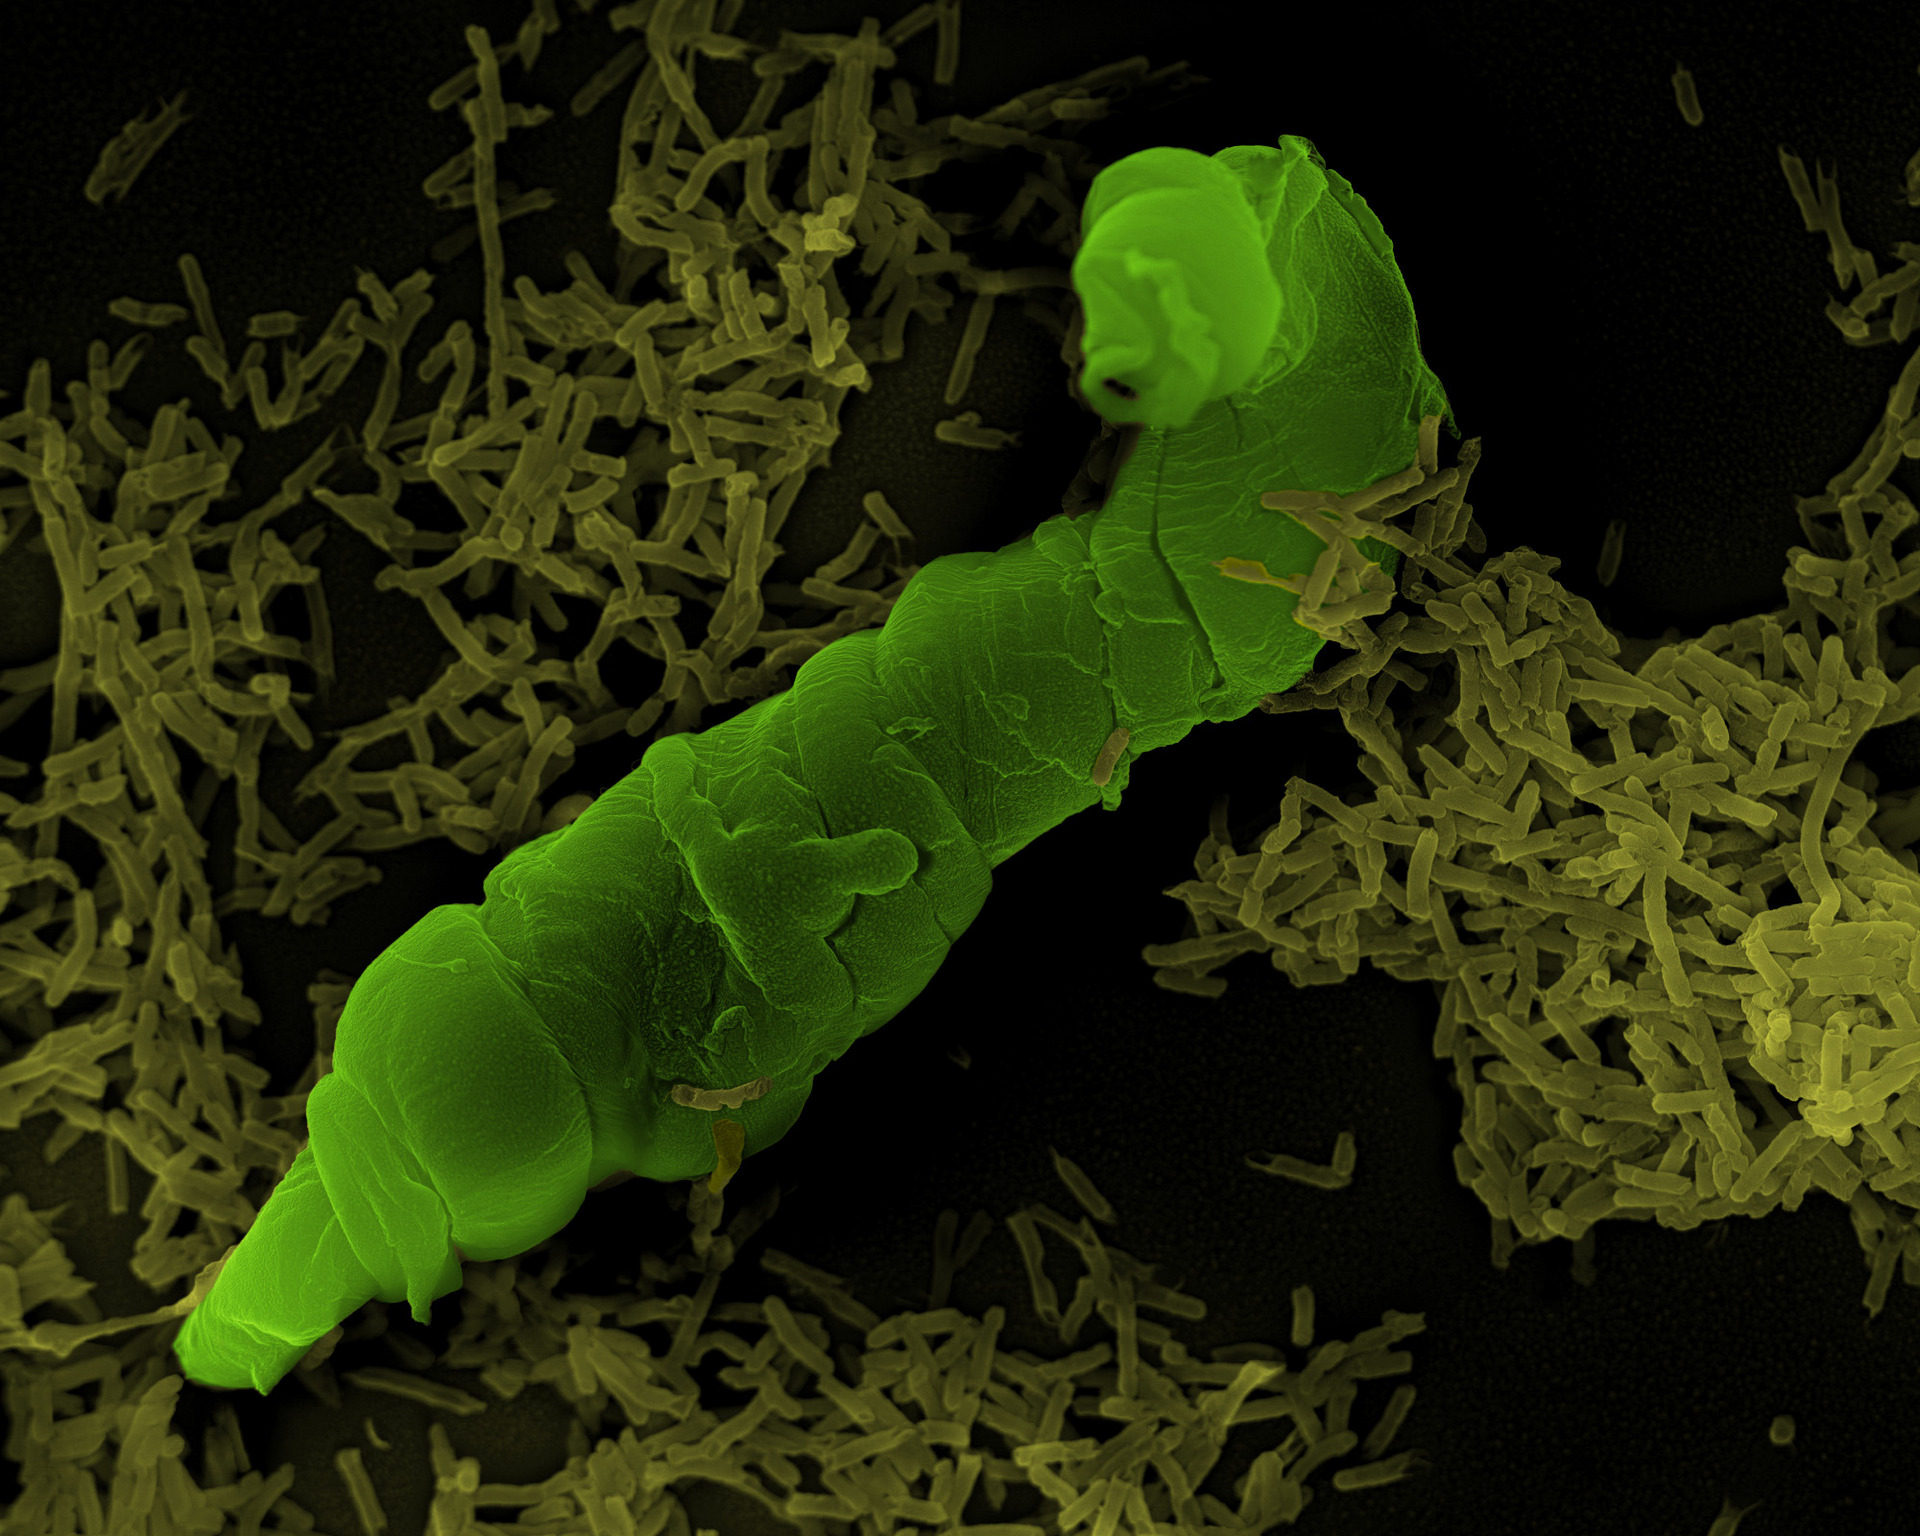 SEM image of a nematode in a bacterial culture